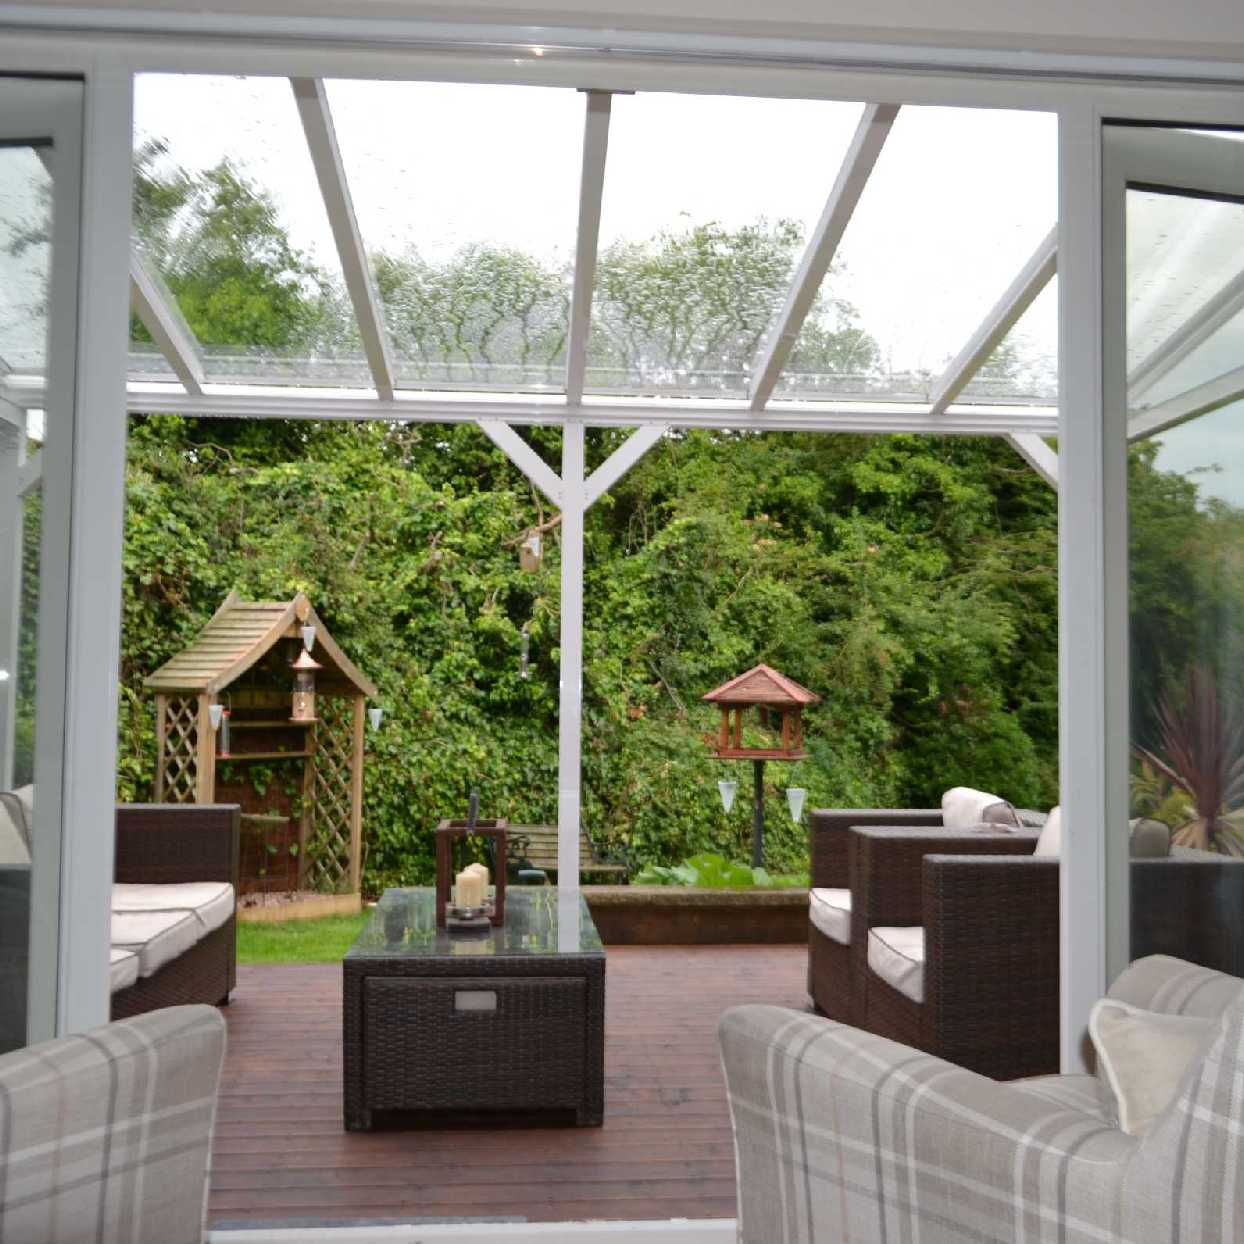 Buy Omega Smart Free-Standing, White MonoPitch Roof Canopy with 6mm Glass Clear Plate Polycarbonate Glazing - 3.5m (W) x 3.0m (P), (6) Supporting Posts online today